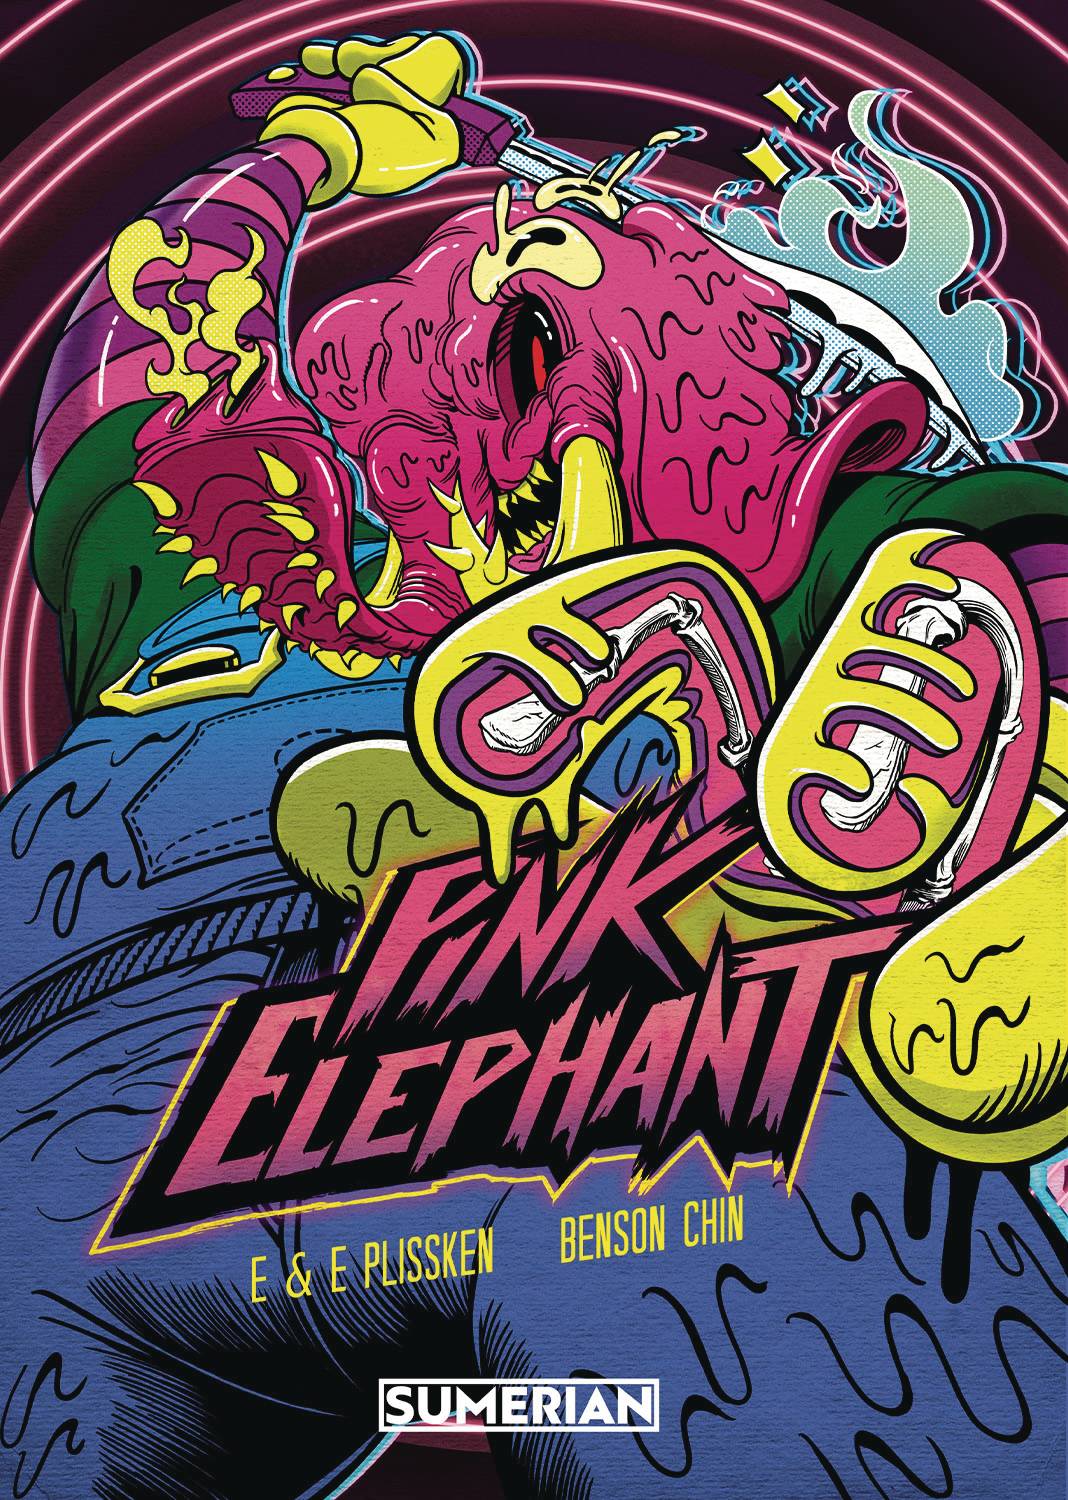 THE PINK ELEPHANT #1 (OF 3) CVR A CHIN